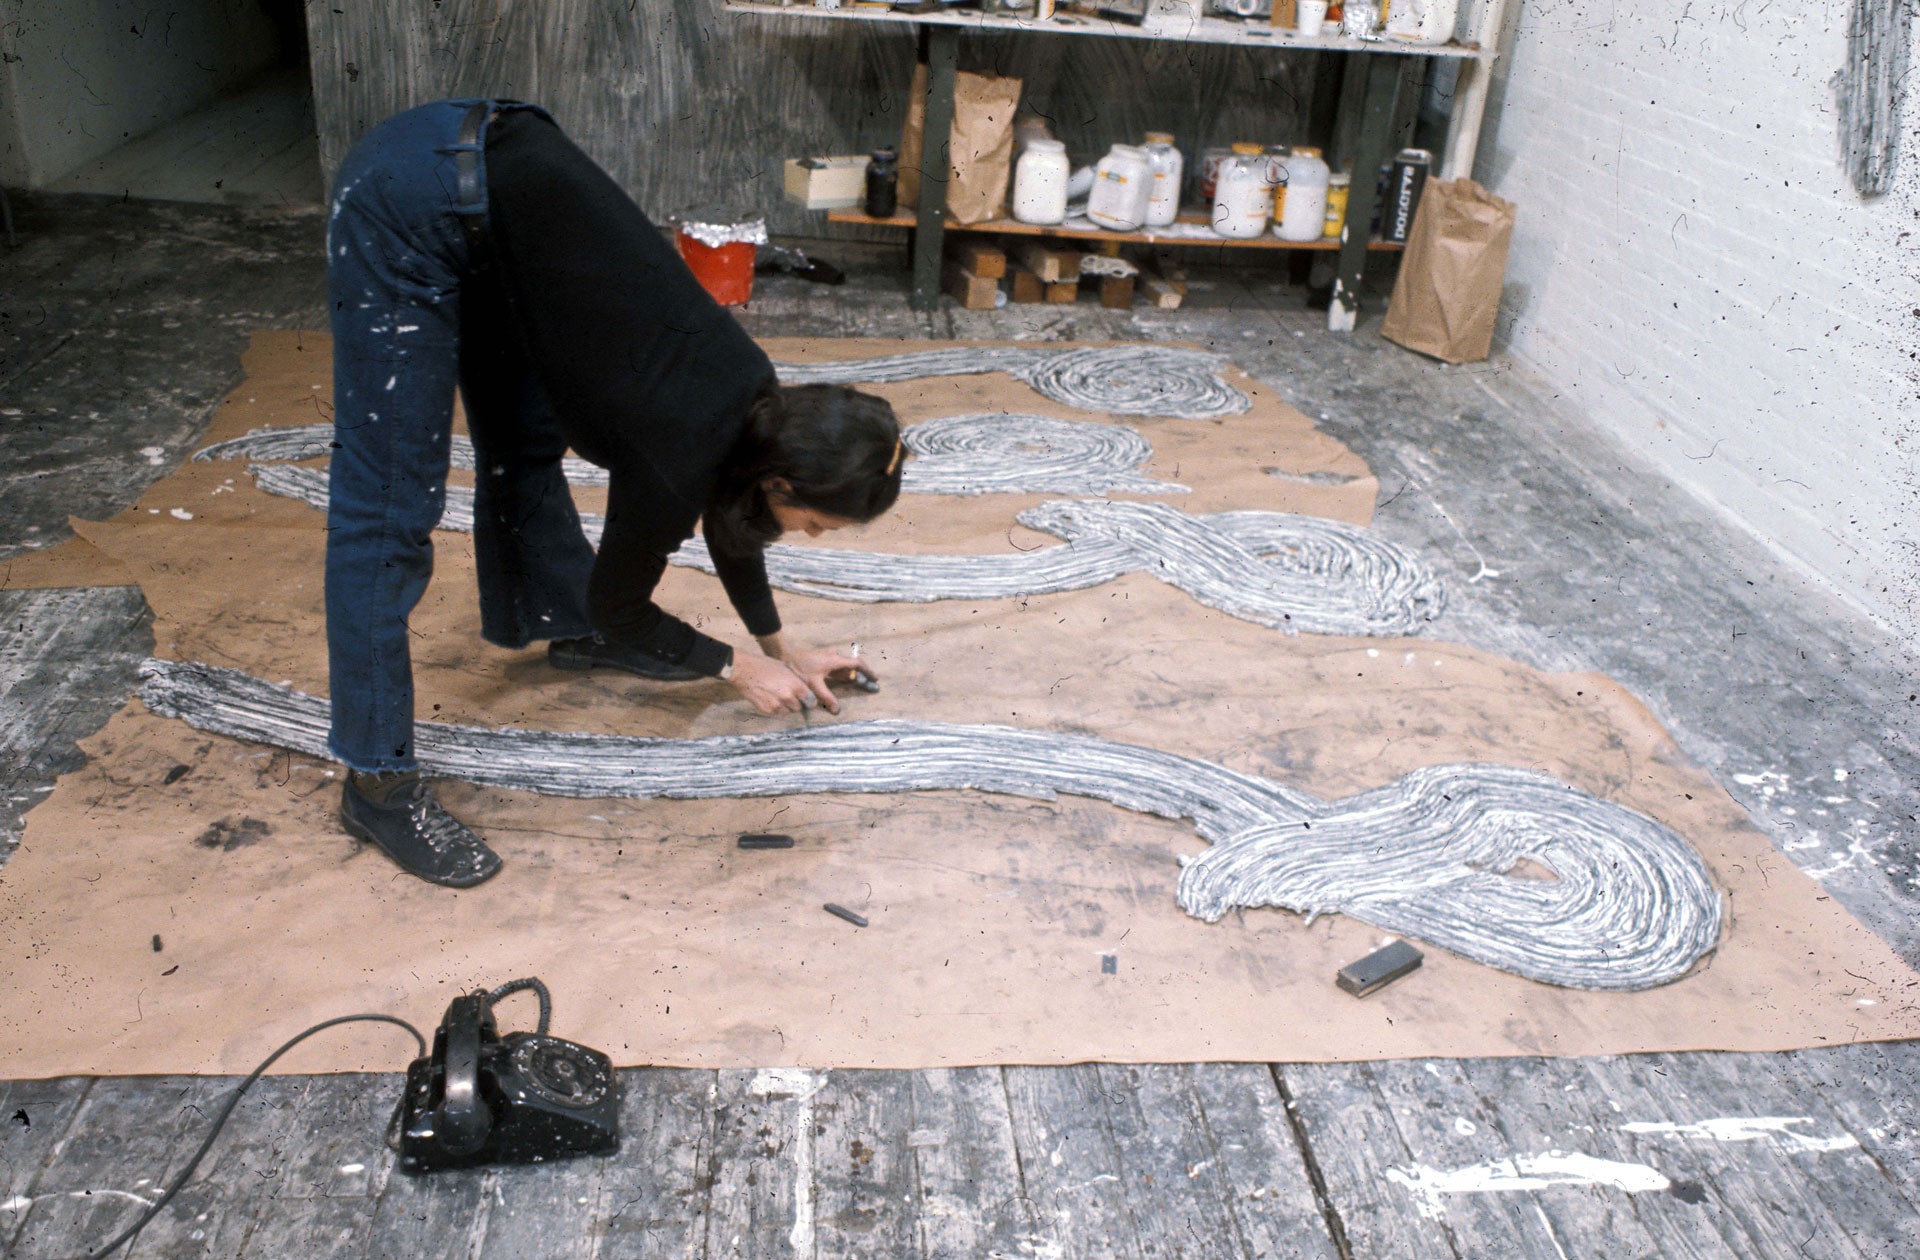 A woman bends over to continue working on a sculptural work of art on the floor. In one hand she holds a cigarette.